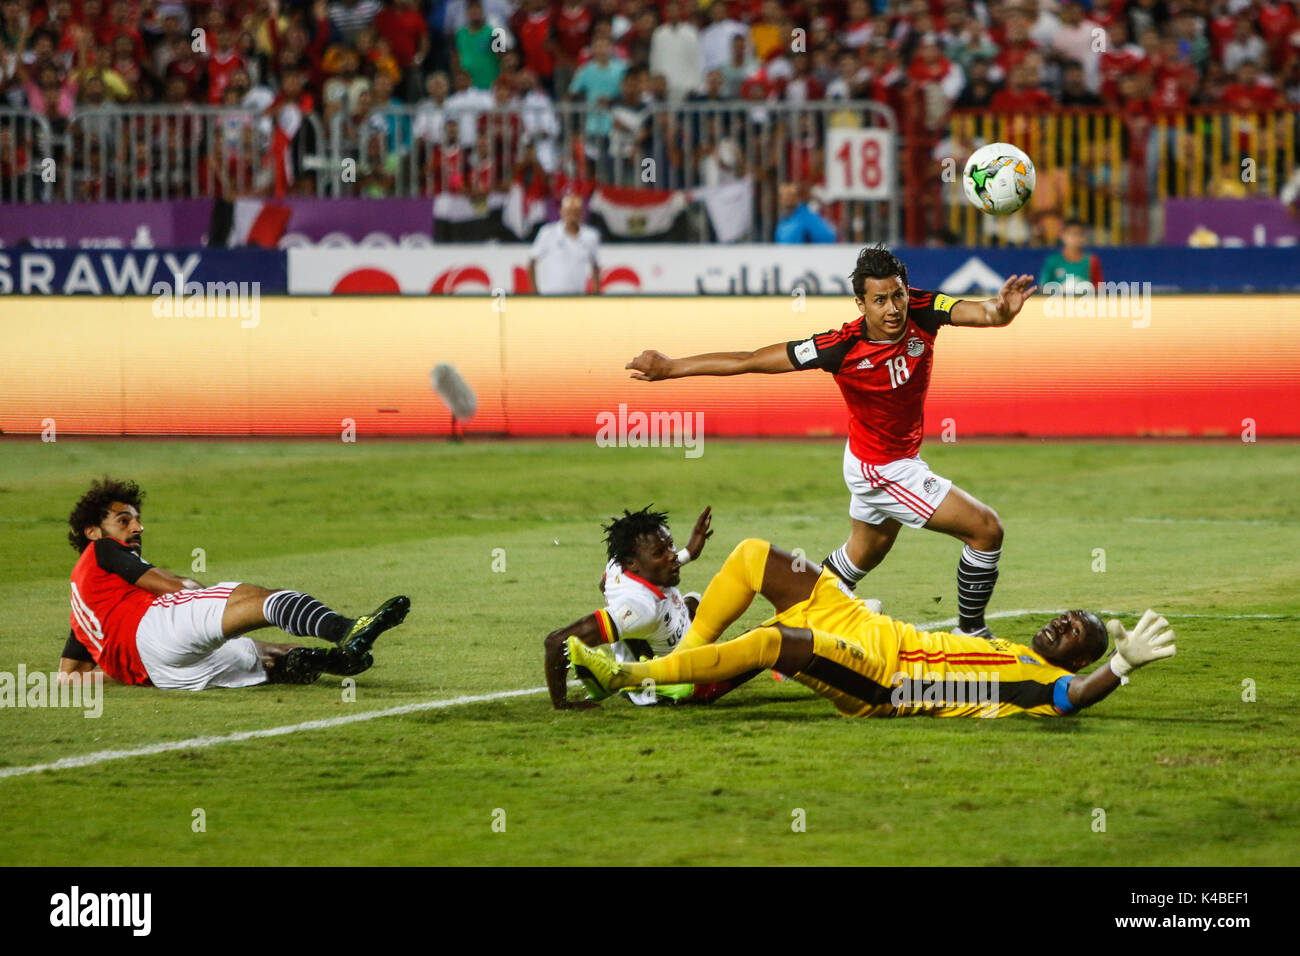 Alexandria, Egypt. 5th Sep, 2017. Egypt's Mohamed Salah, lay down left, scores his side's opening goal against Uganda's goalkeeper Denis Onyango, lay down right, during the 2018 World Cup group E qualifying soccer match between Egypt and Uganda at the Borg El Arab Stadium in Alexandria, Egypt, Tuesday, Sept. 5, 2017. Credit: Islam Safwat/Alamy Live News Stock Photo